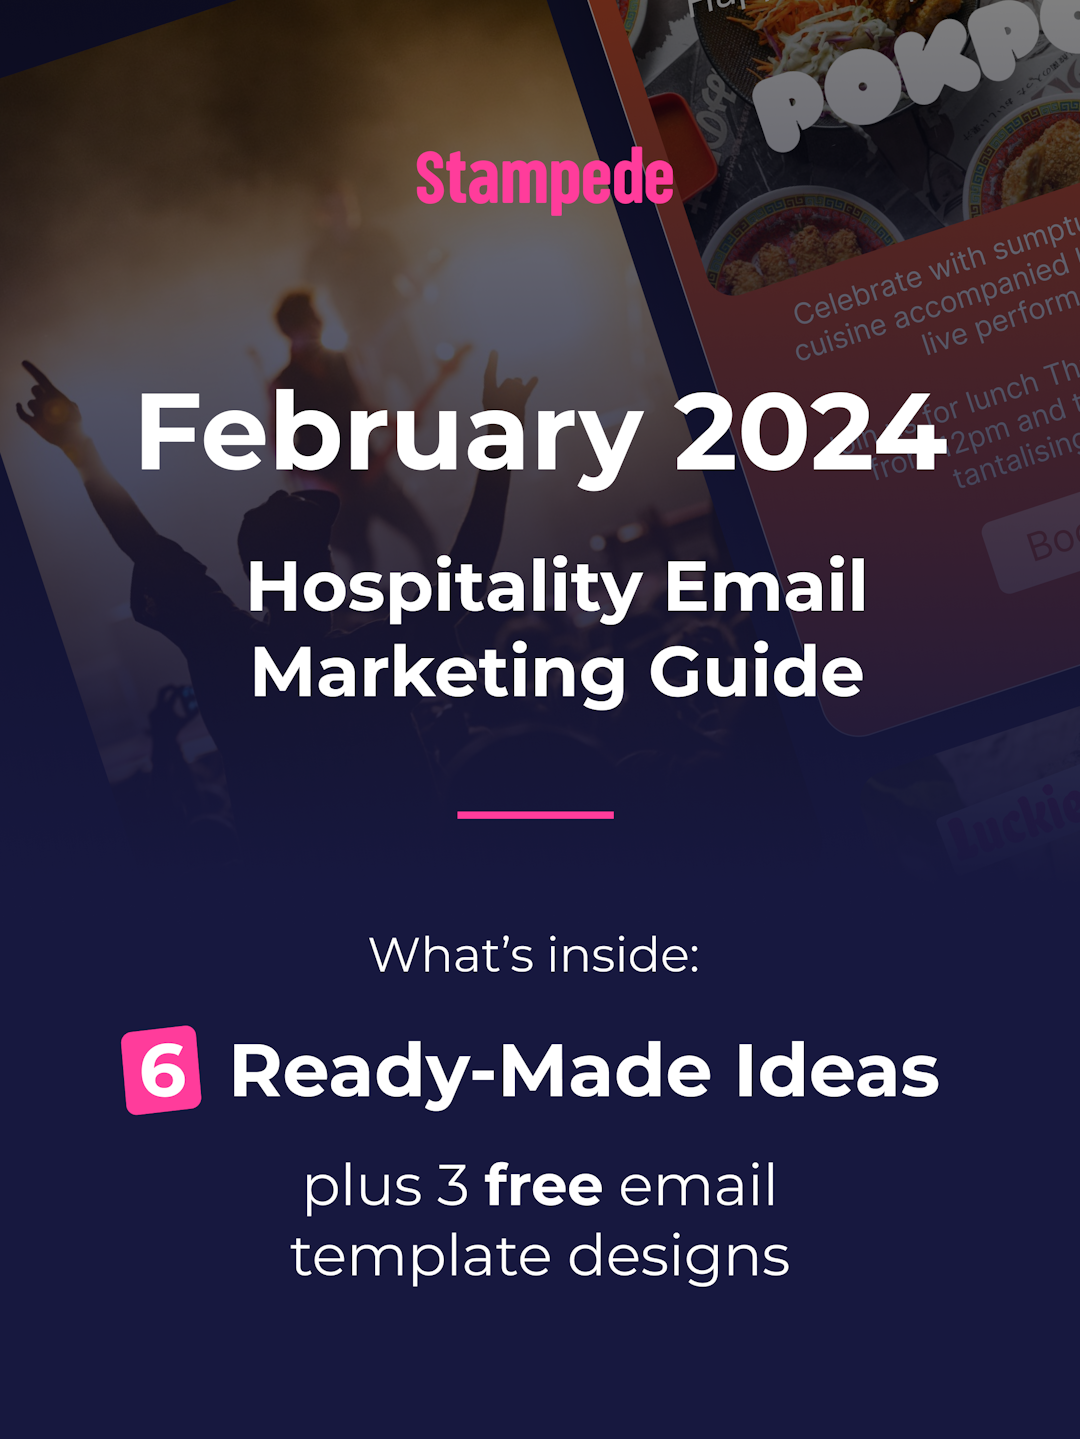 February 2024 Email Marketing Guide